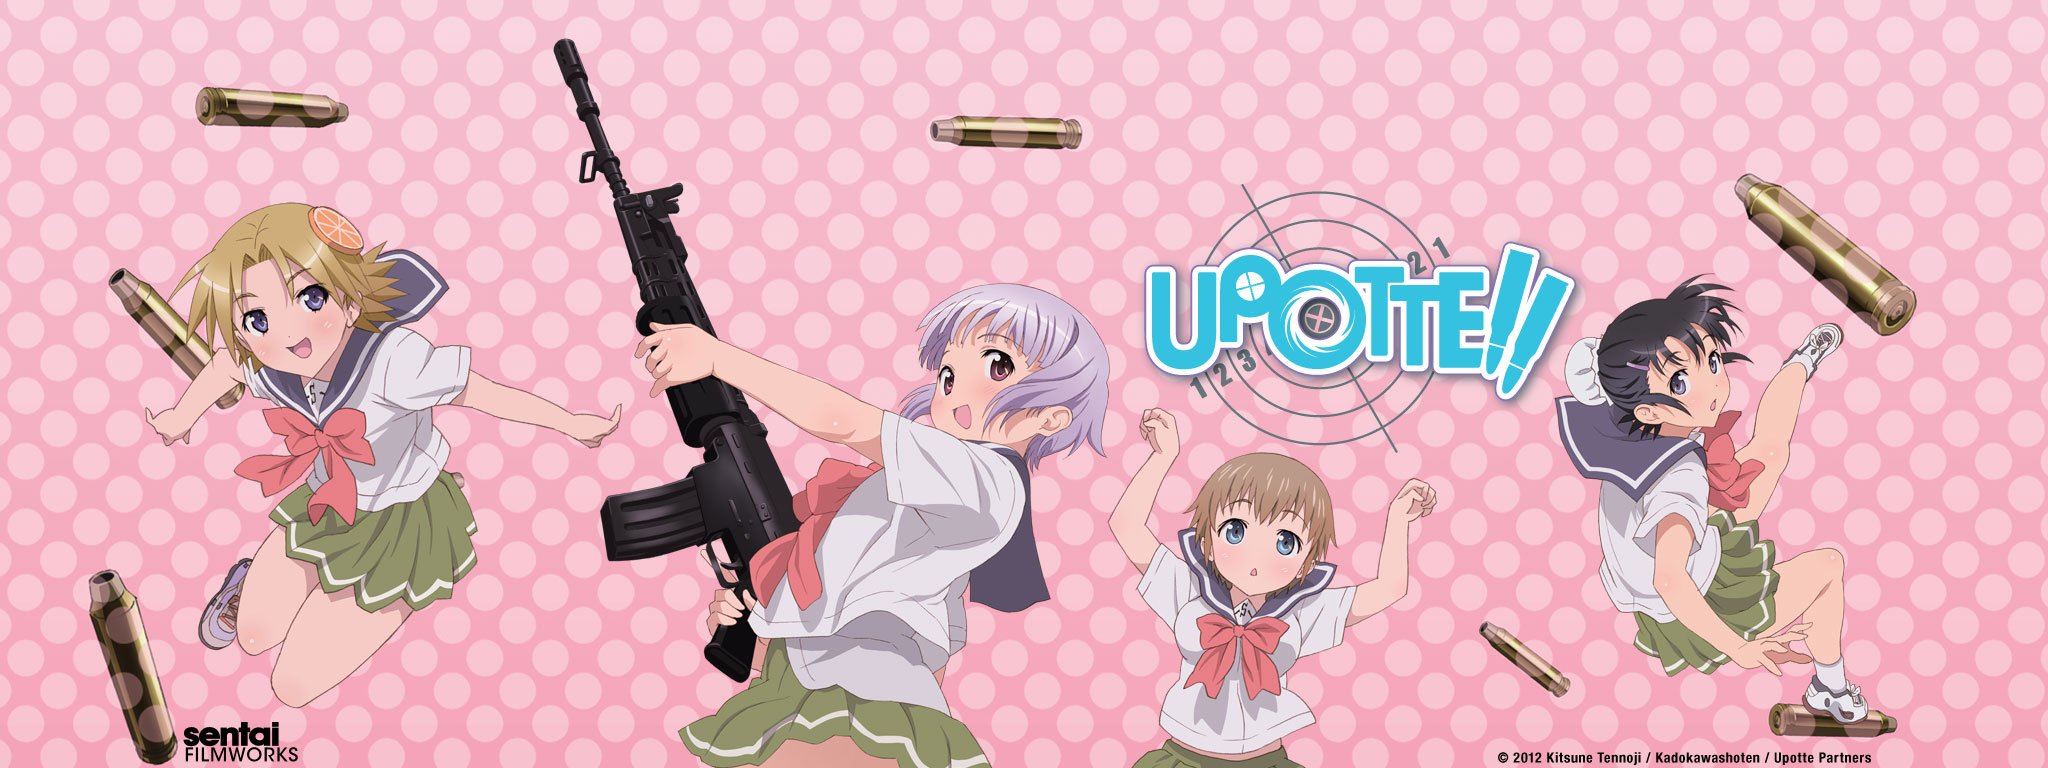 Title Art for Upotte!!